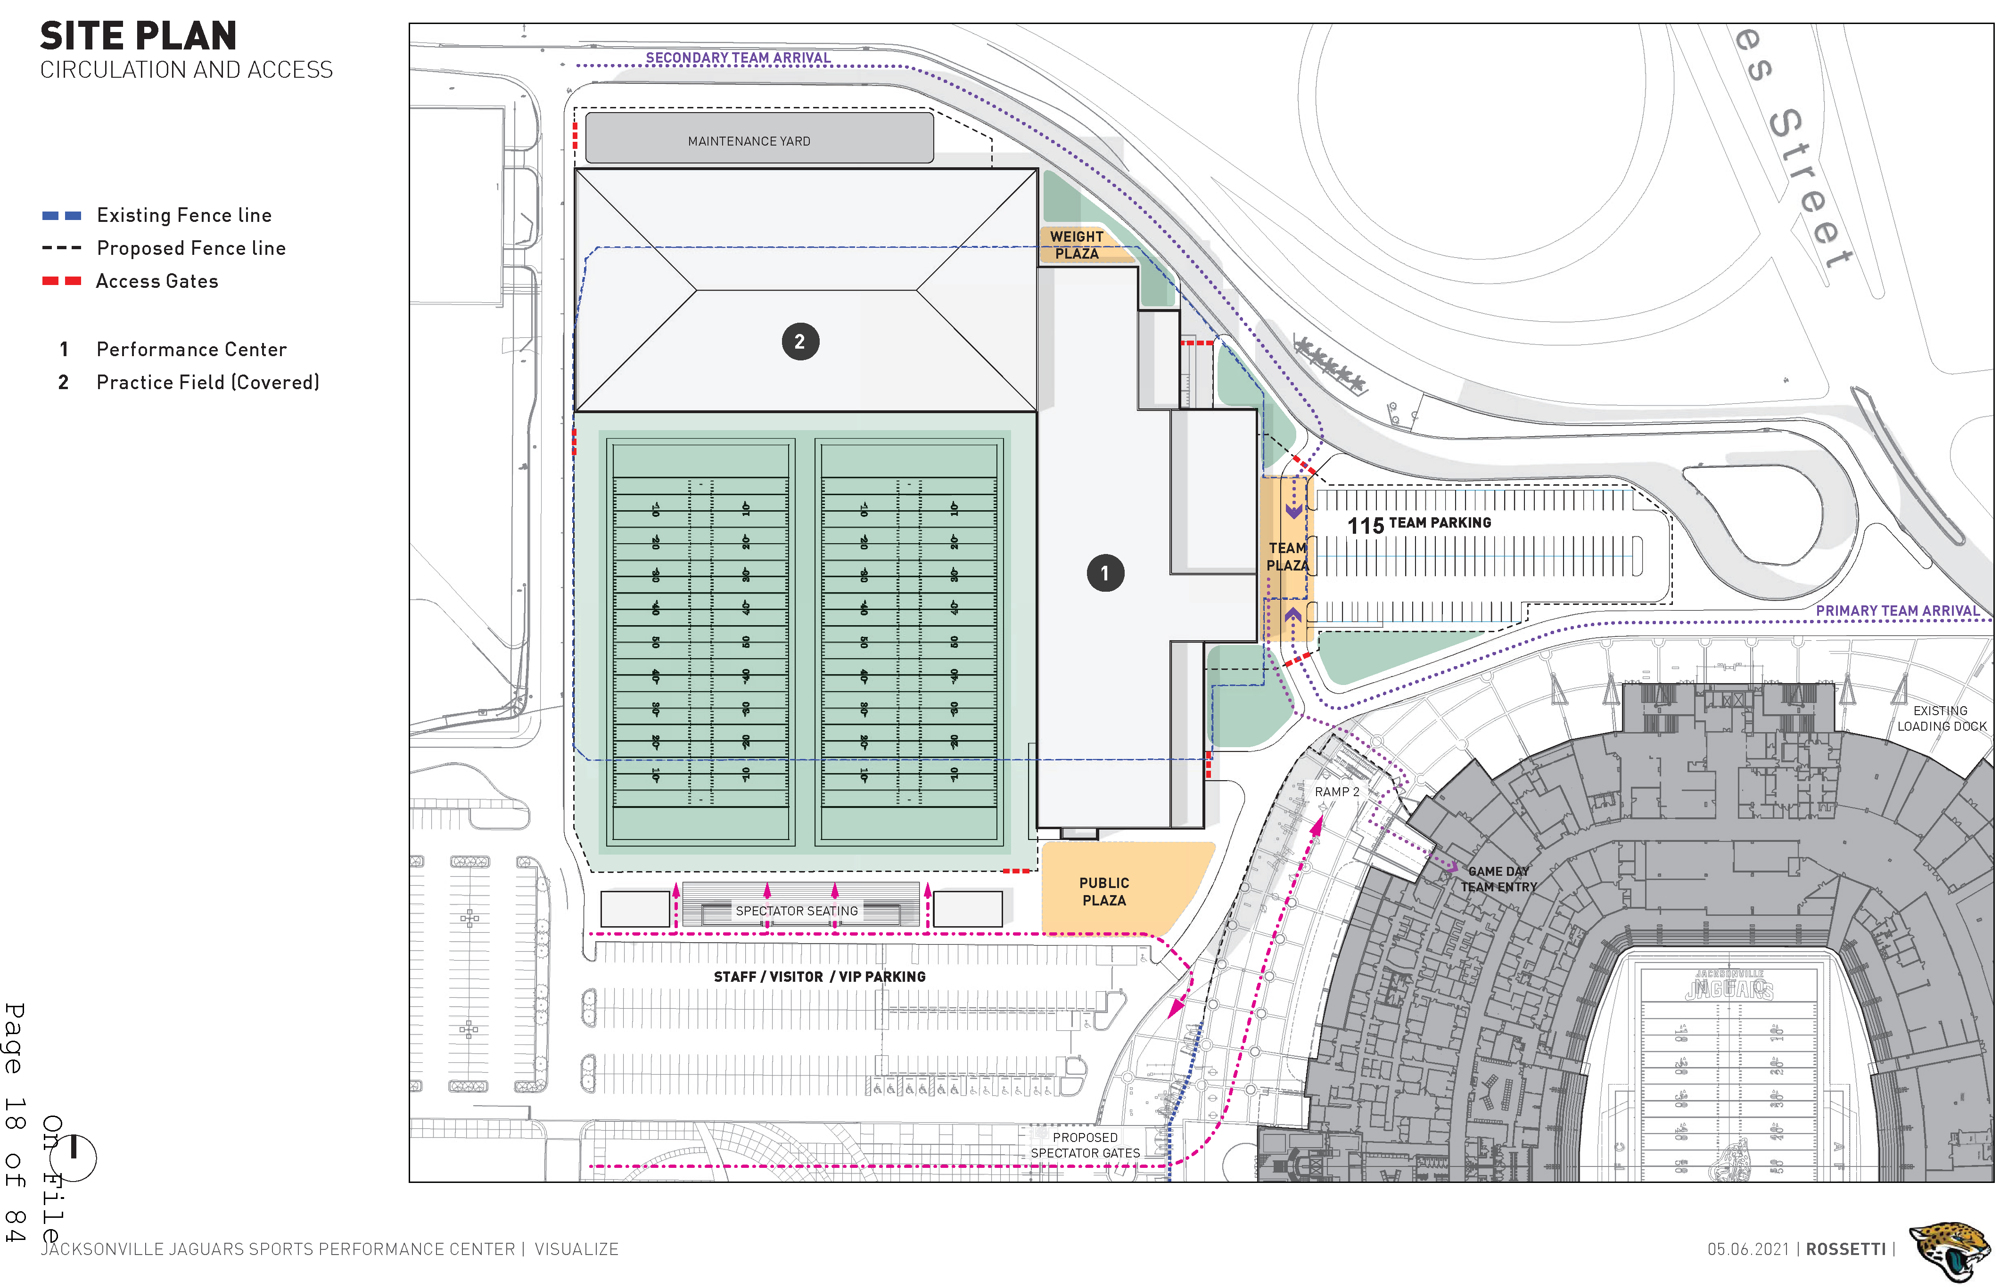 The site plan for the football performance center.